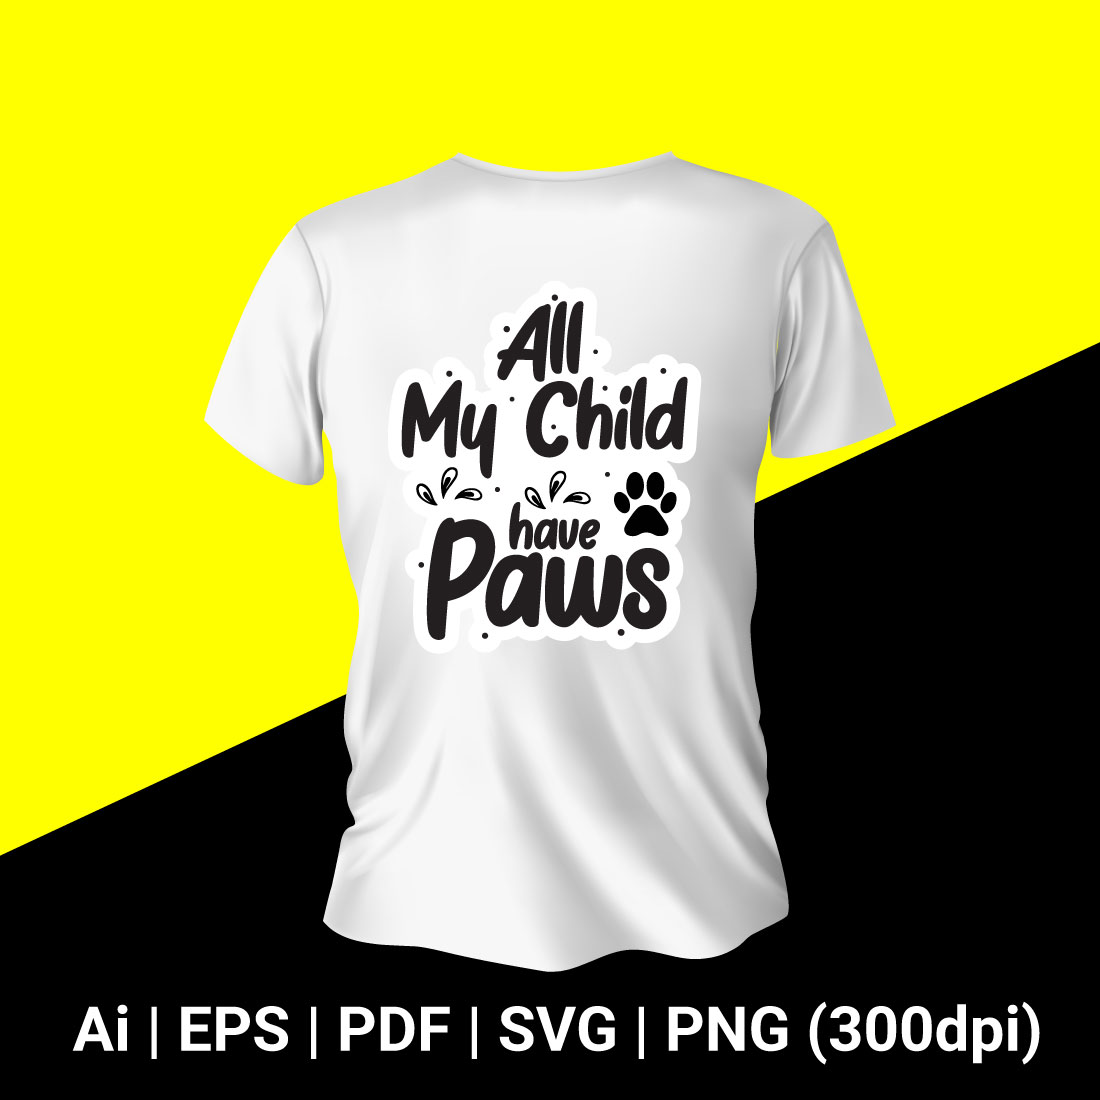 All My Child Have Paws T-shirt Design for Cat Lover cover image.